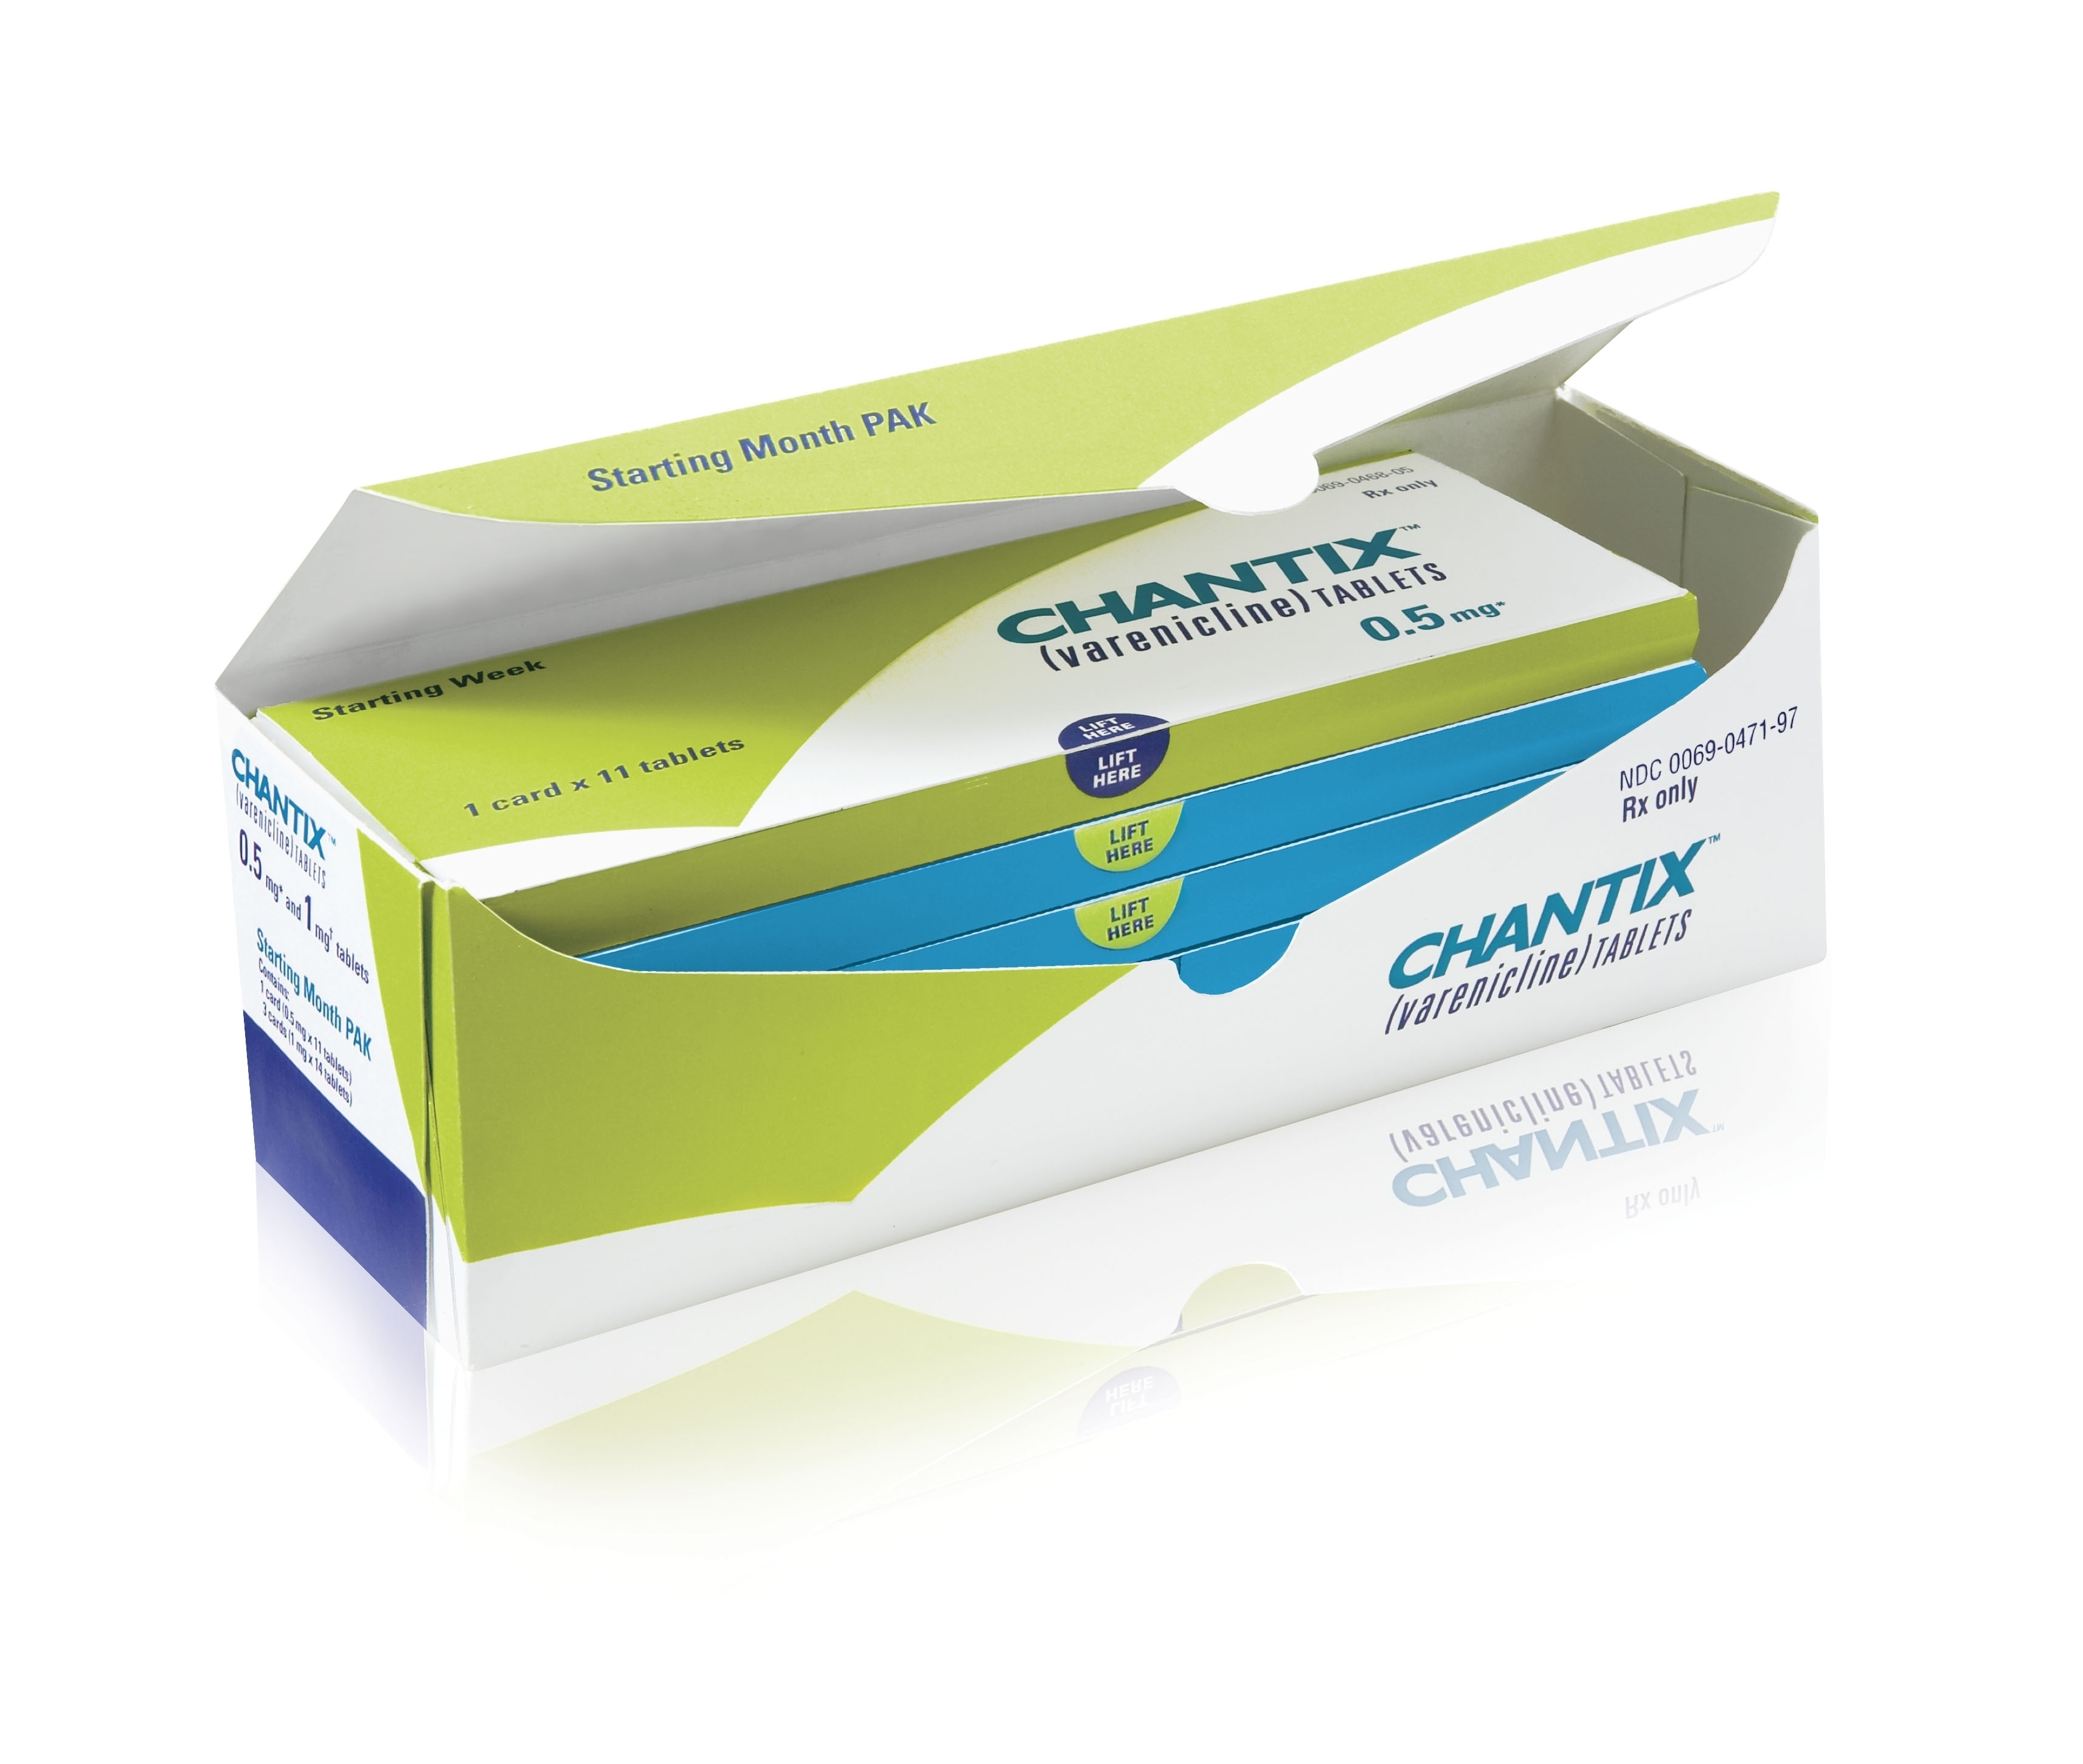 Pfizer to debut Chantix DTC work this month